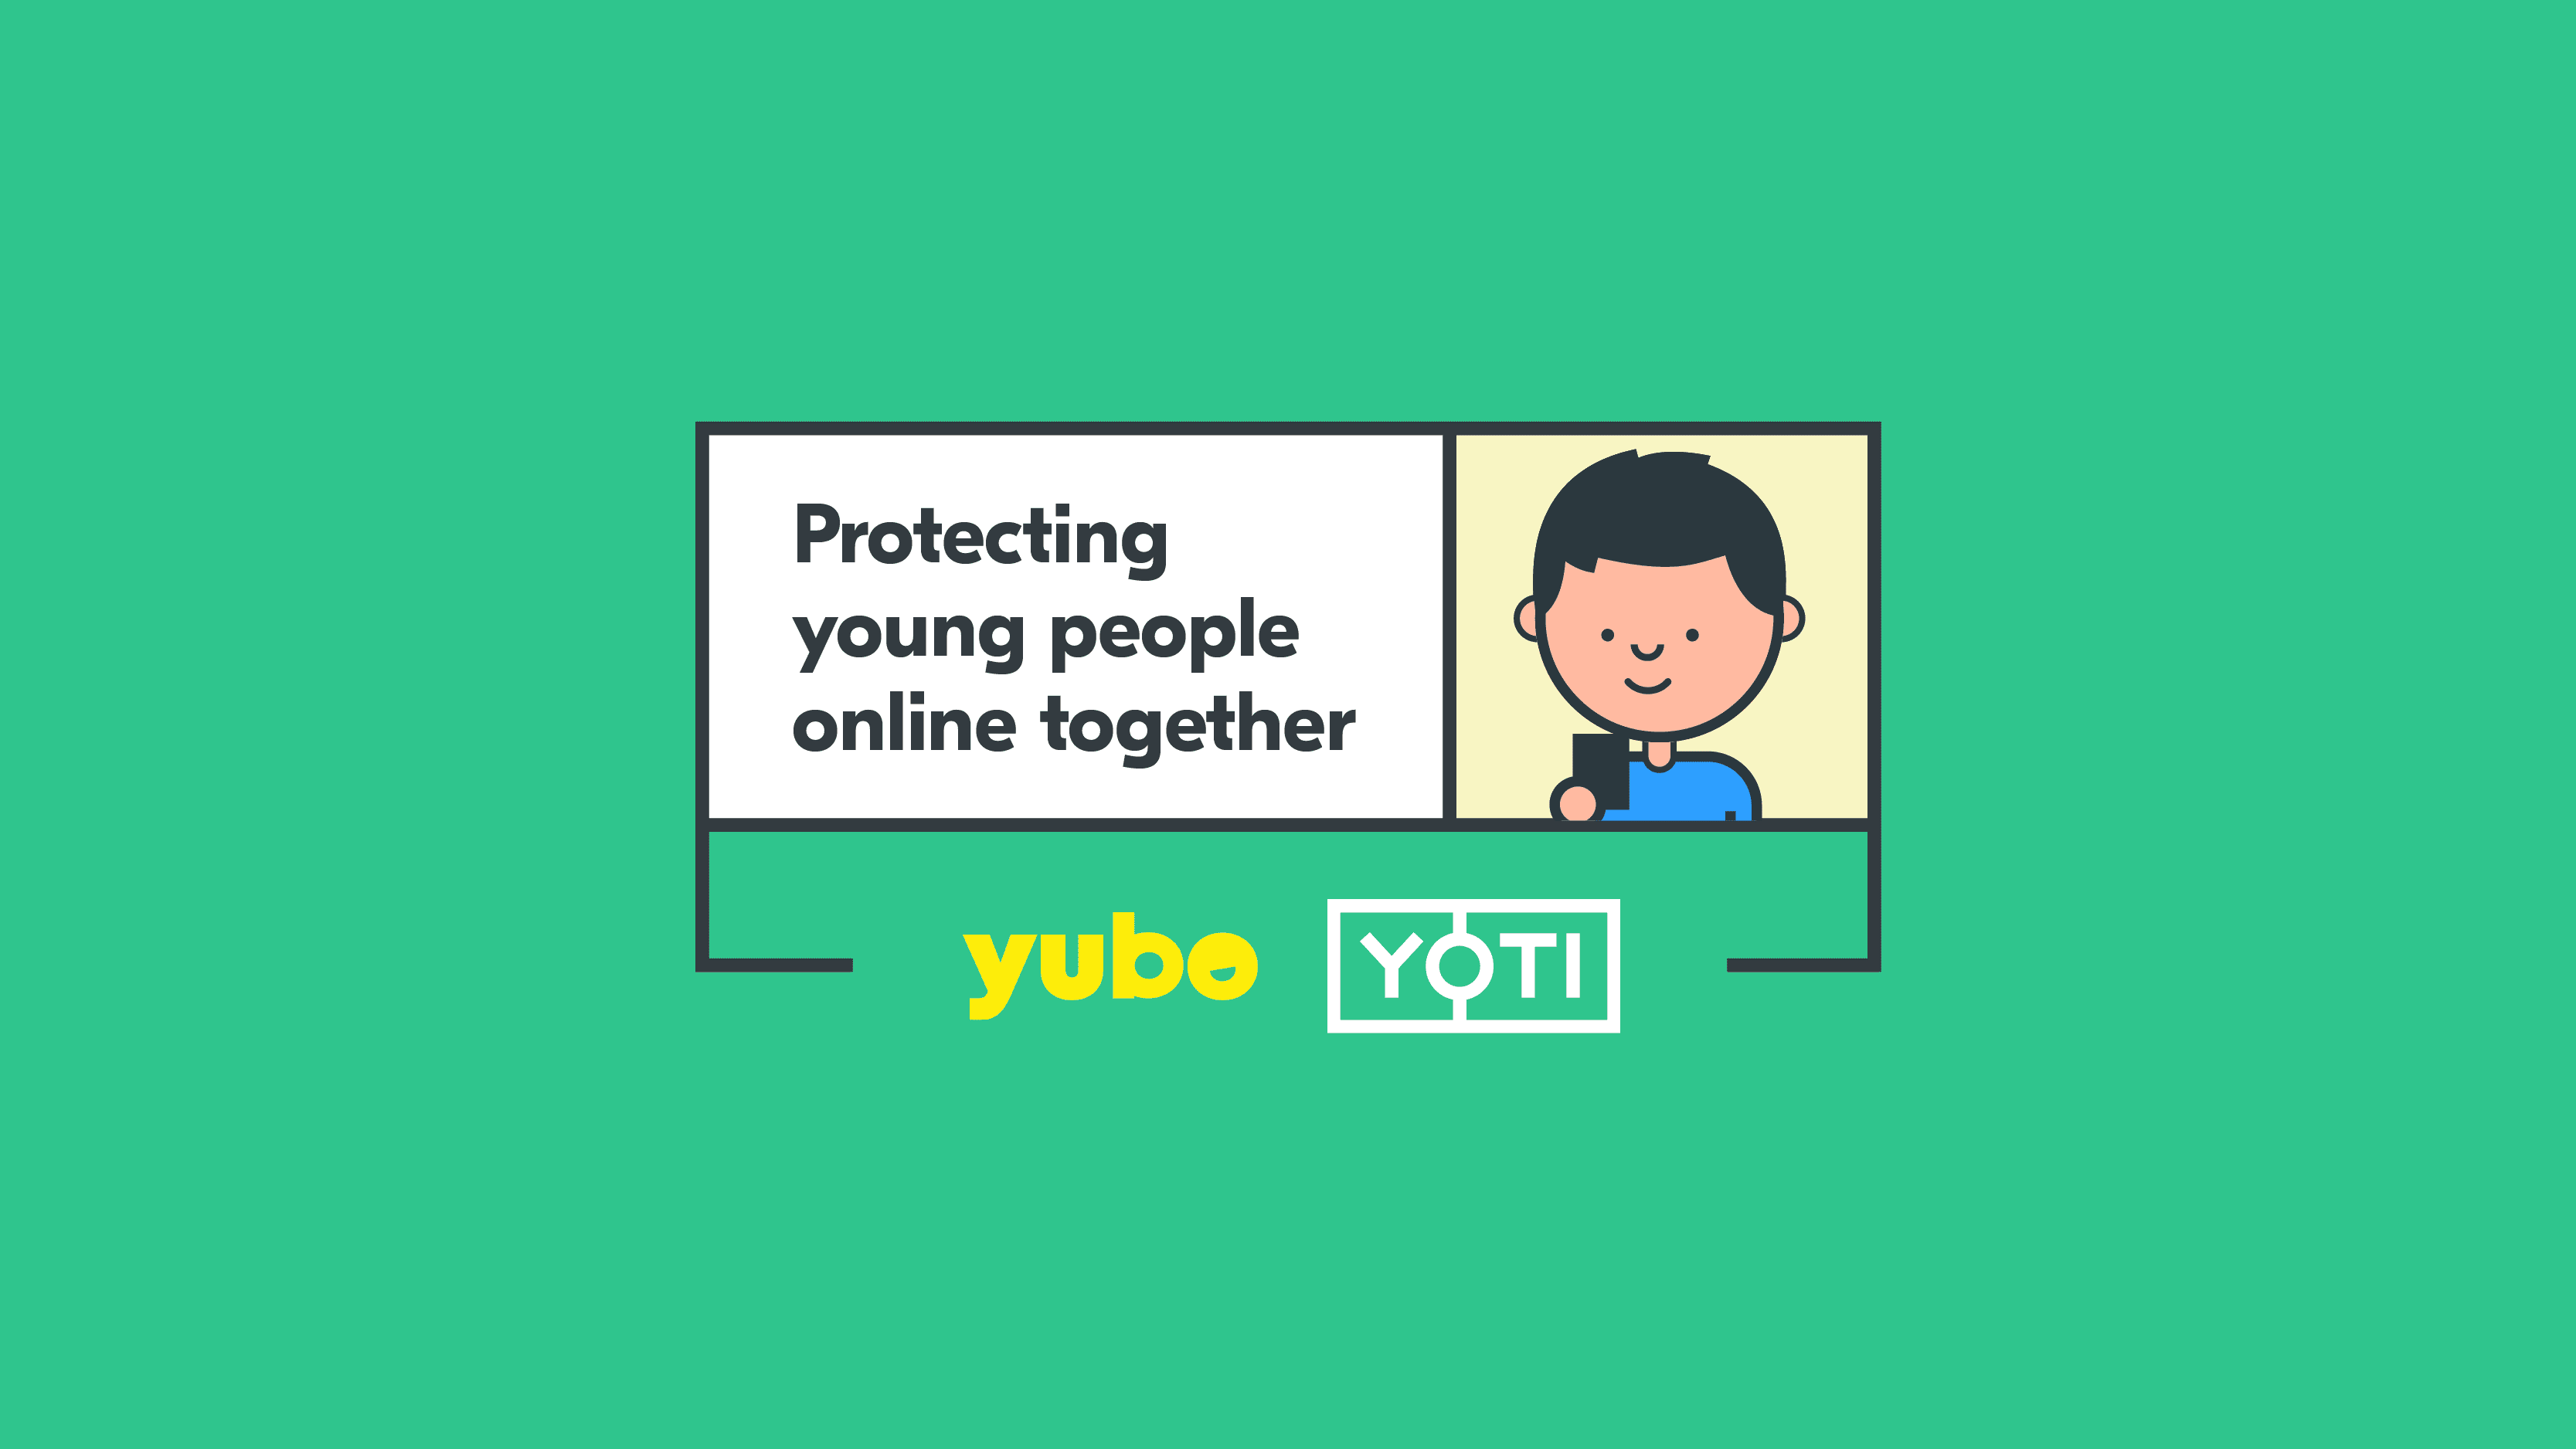 Making the Yubo app safer for users